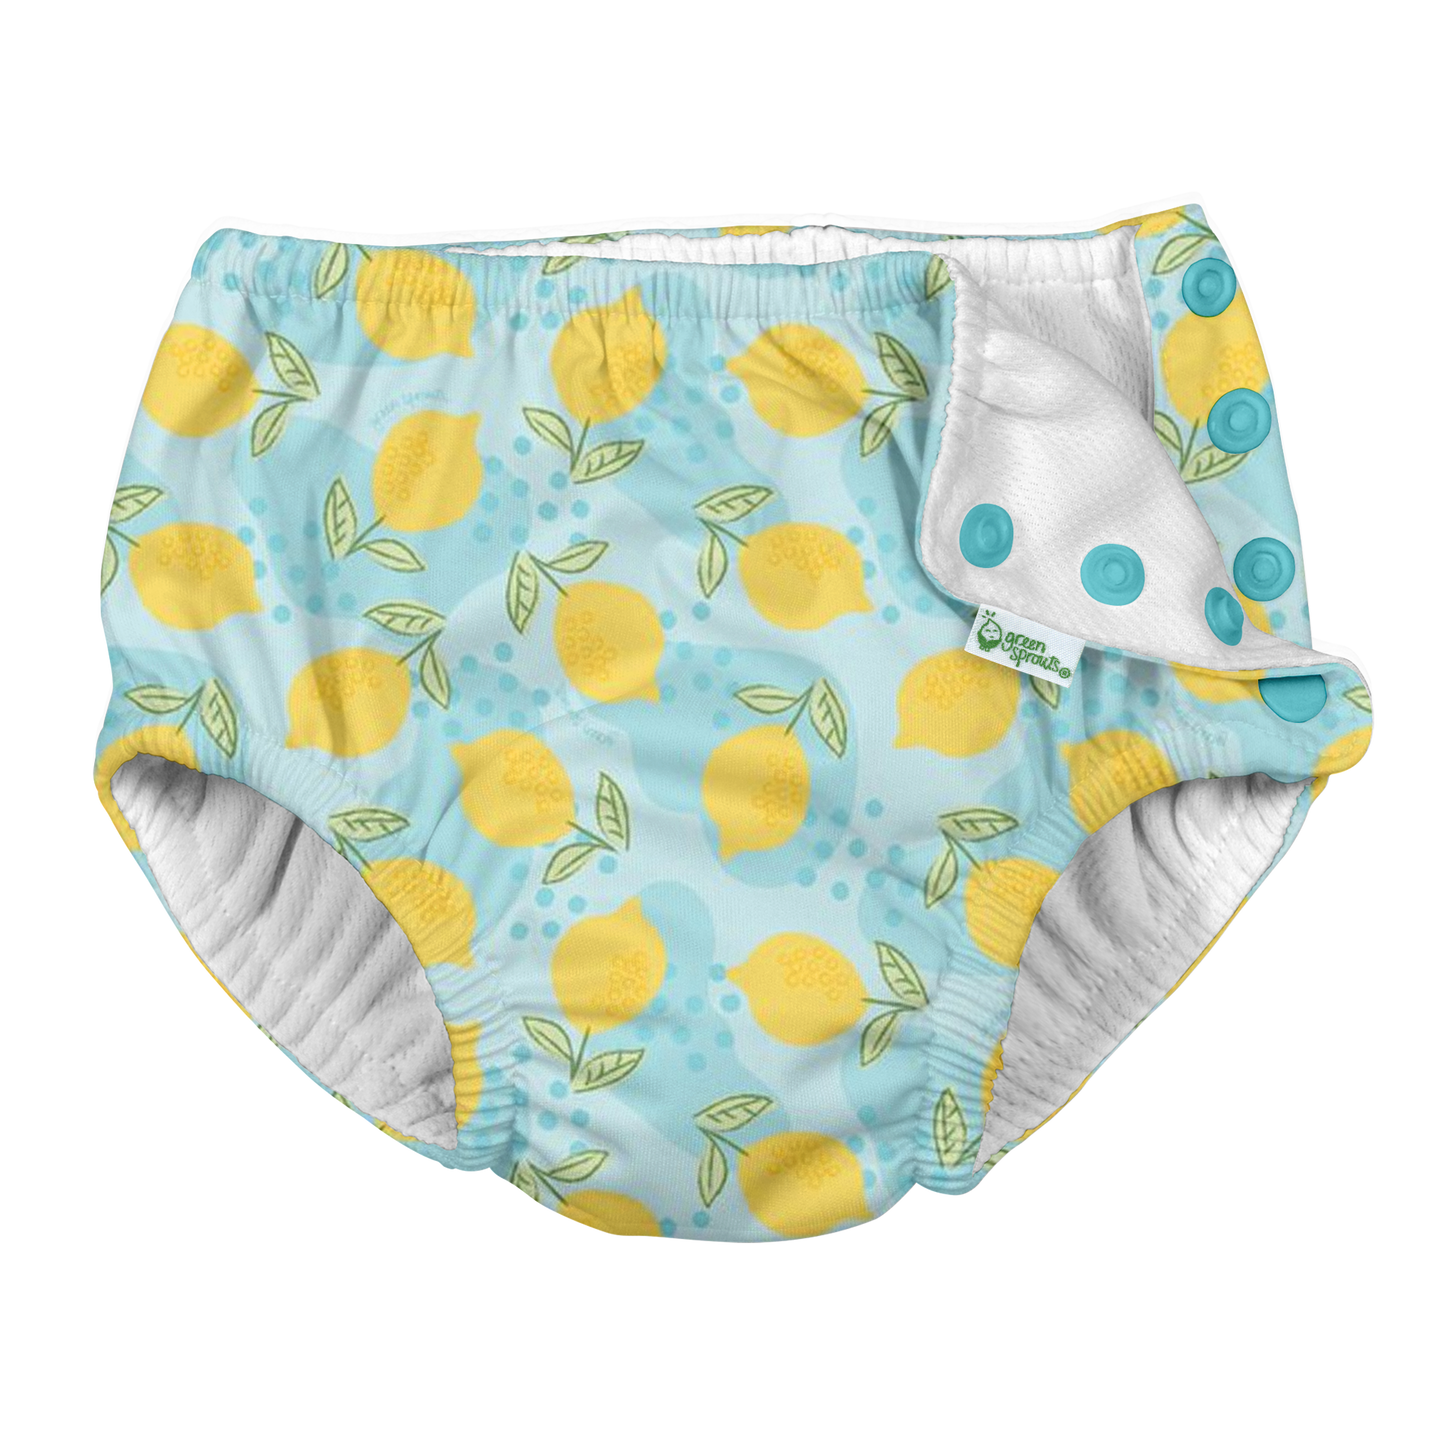 Green Sprouts - Snap Reusable Absorbent Swimsuit Diaper - Fresh Prints